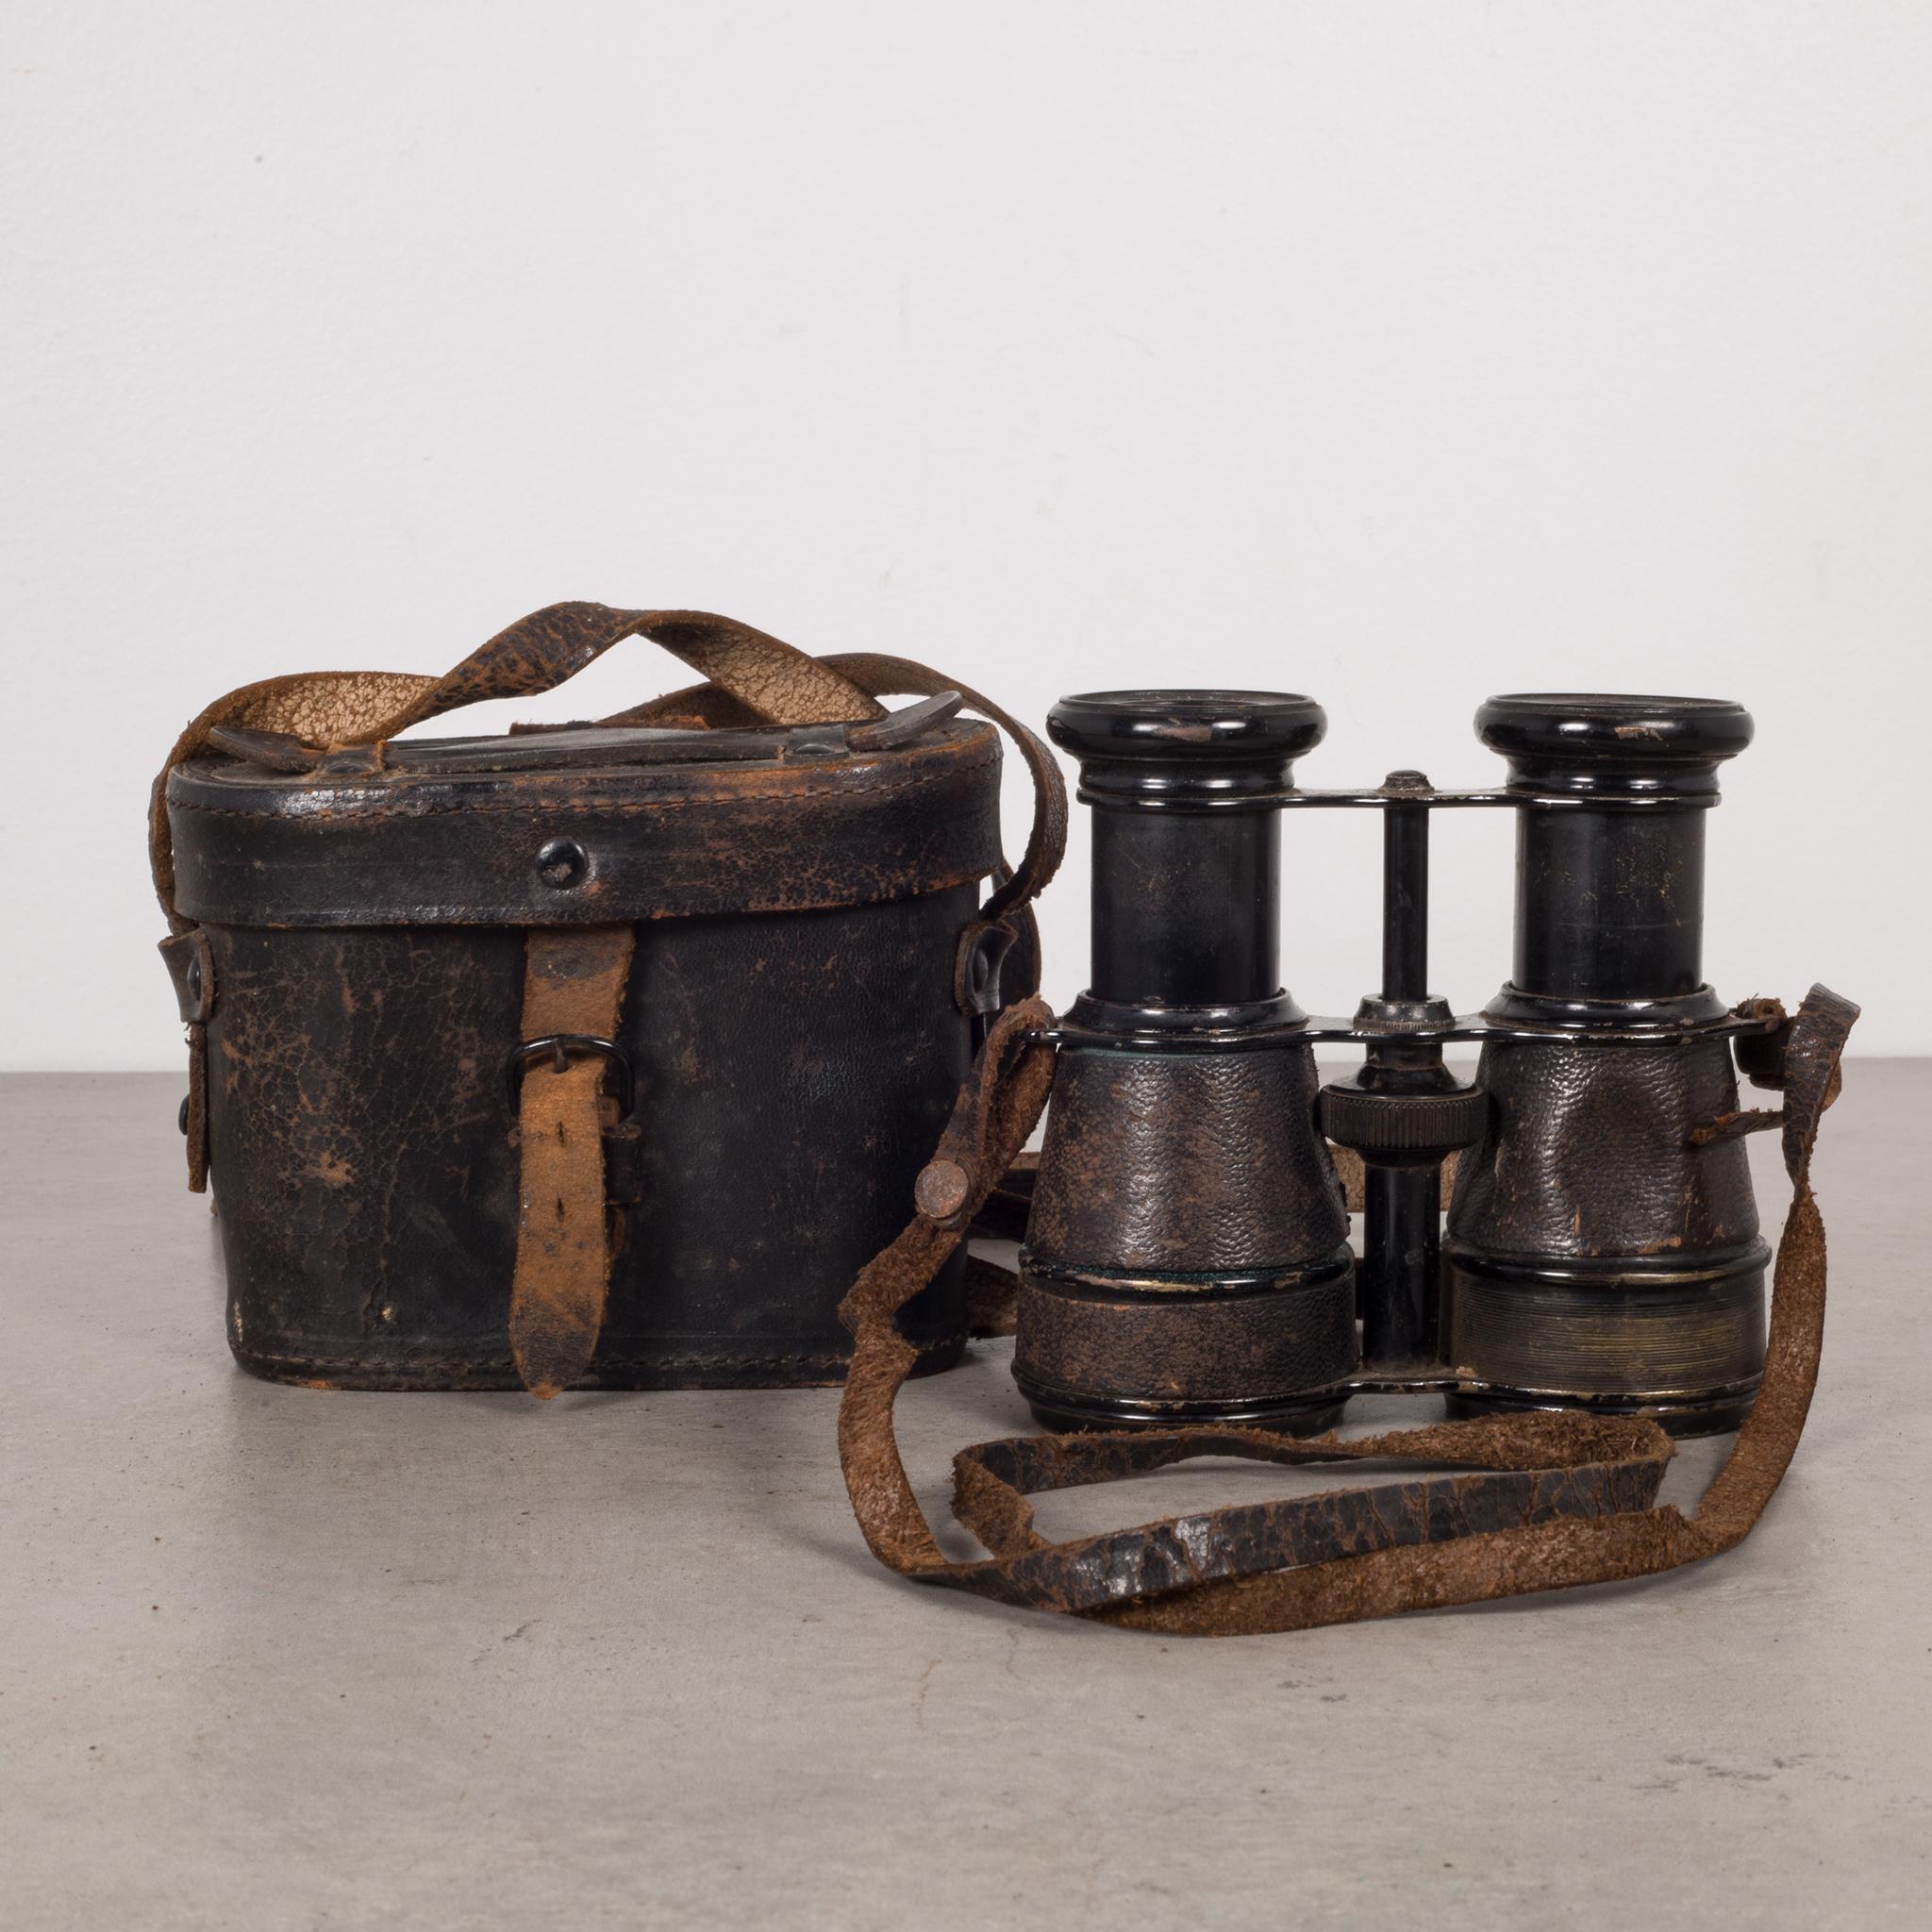 About

This is an original pair of French binoculars stamped on each eyepiece 